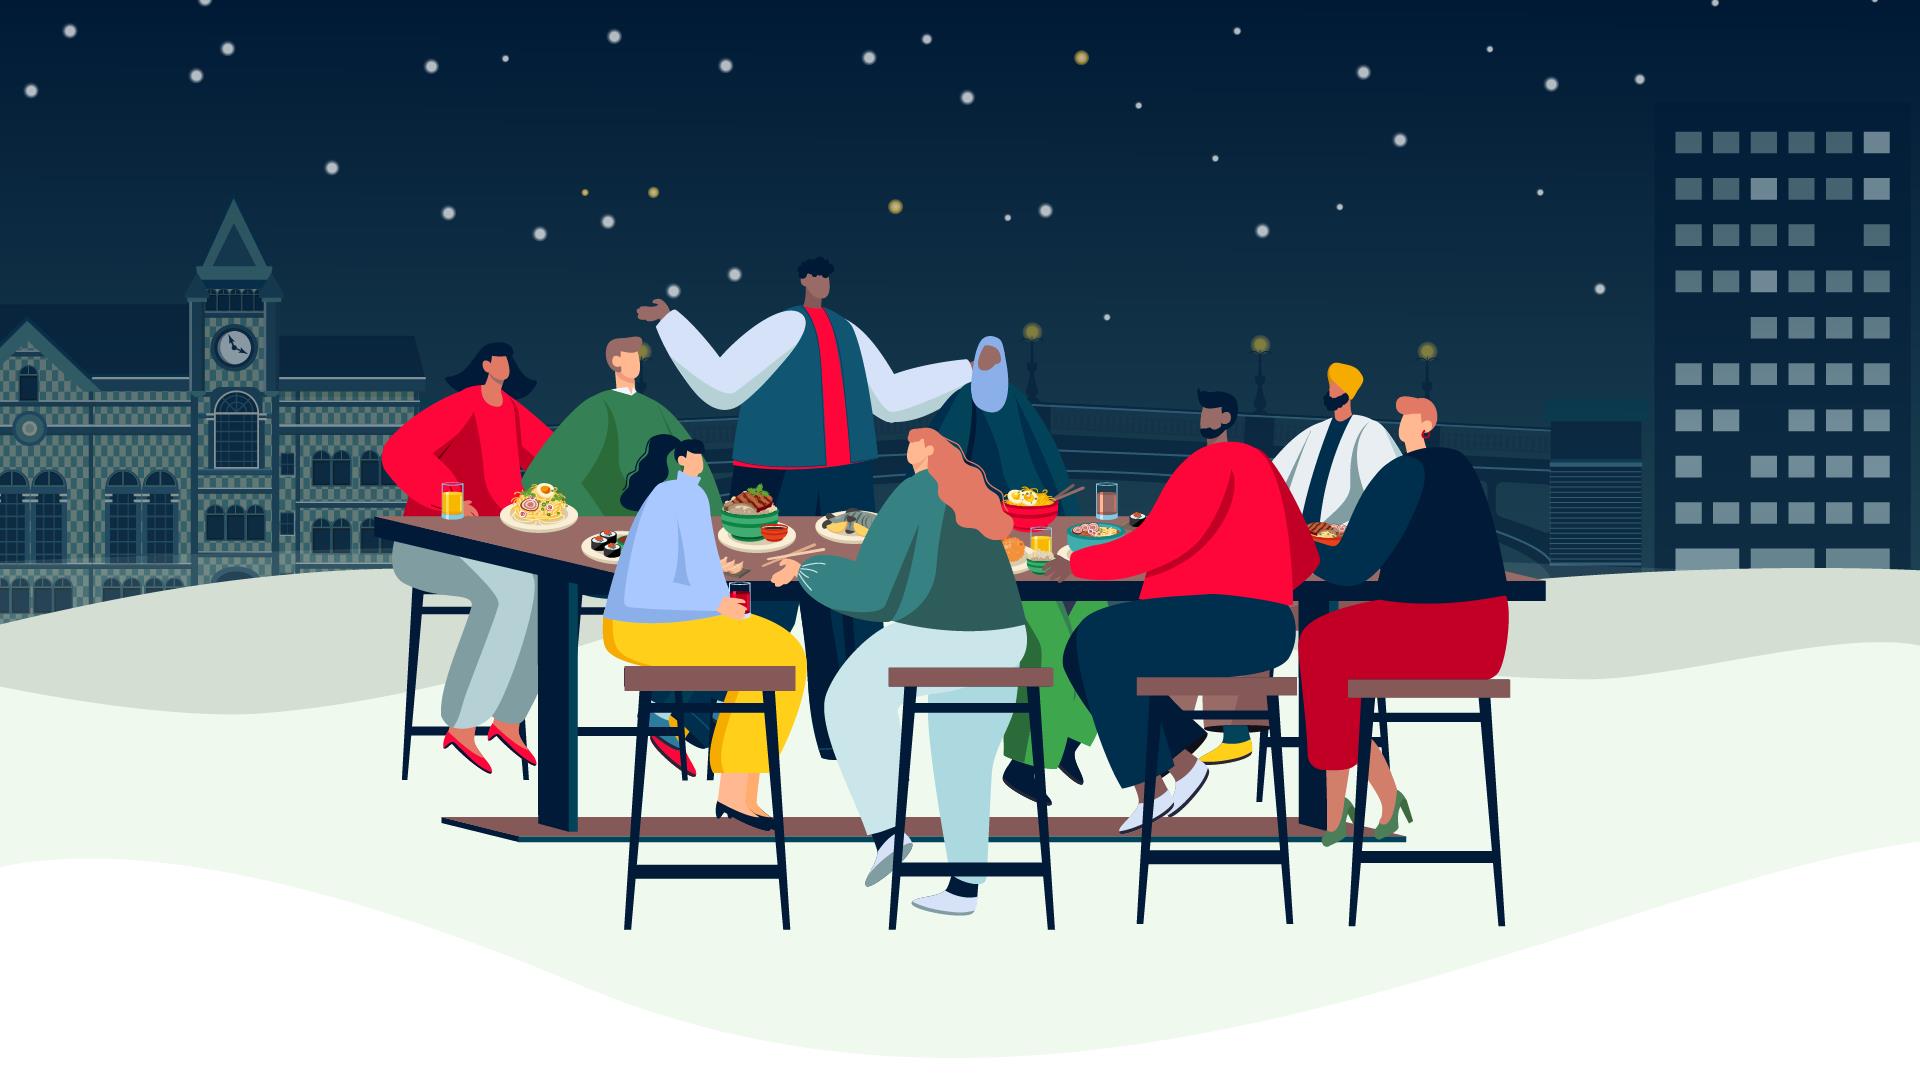 Illustrated Christmas scene showing a group of friends having dinner together to celebrate the festive season